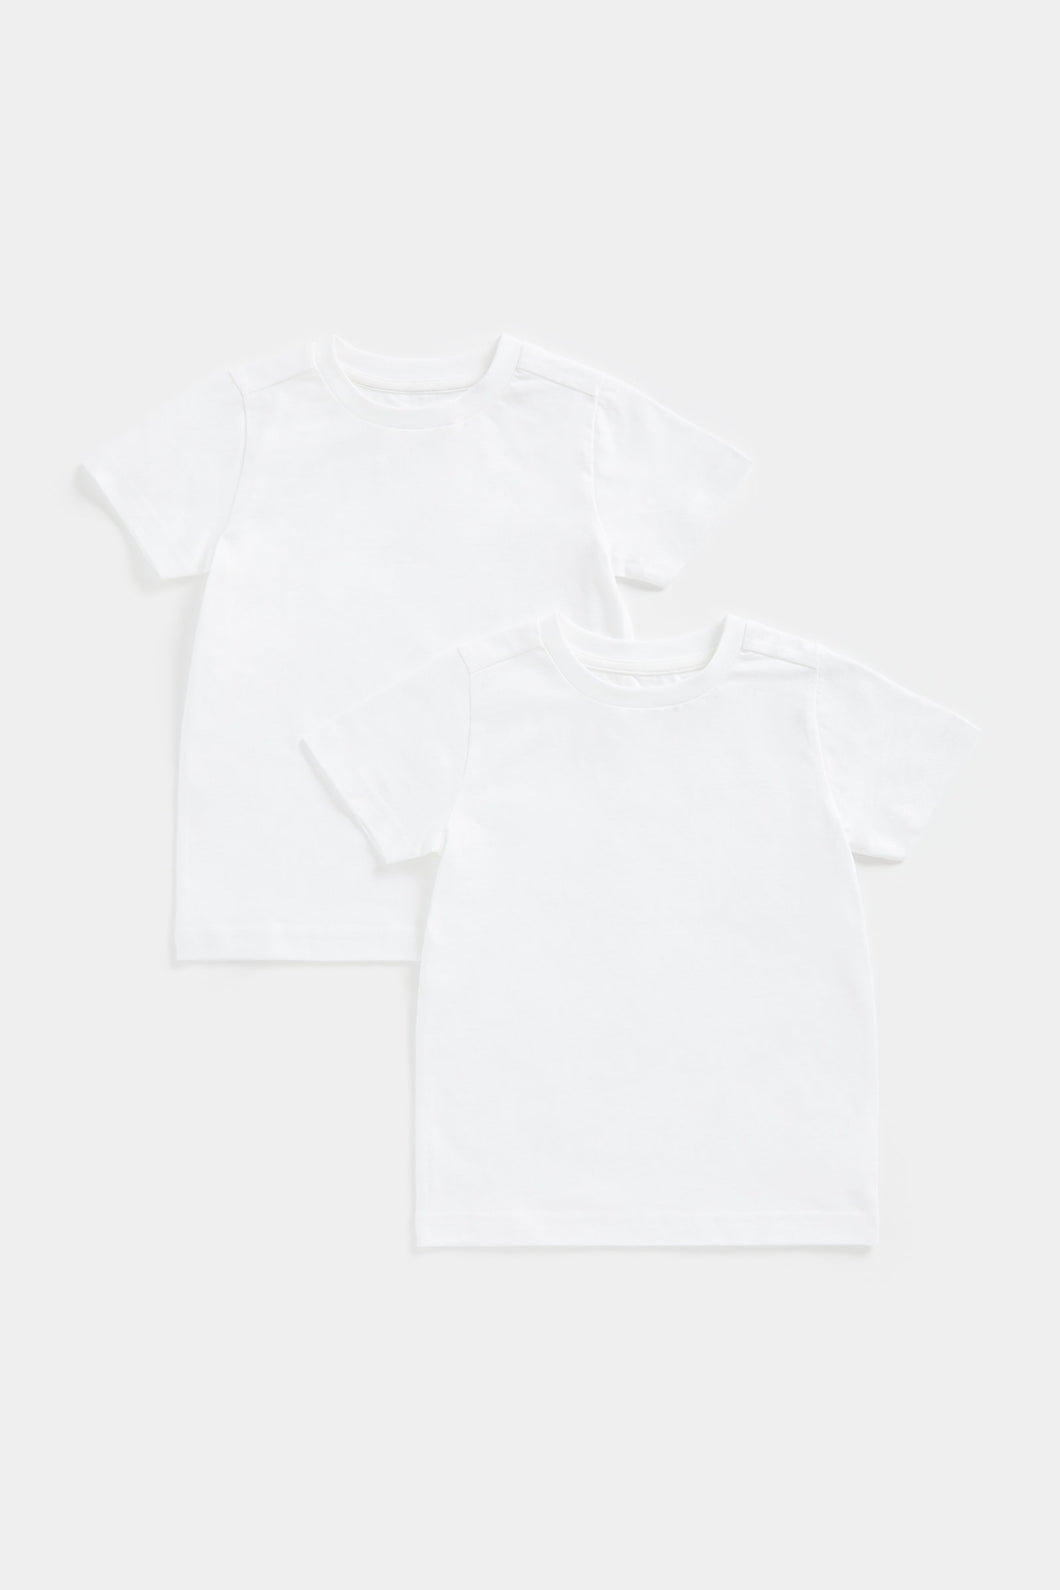 Mothercare White T-Shirts - 2 Pack